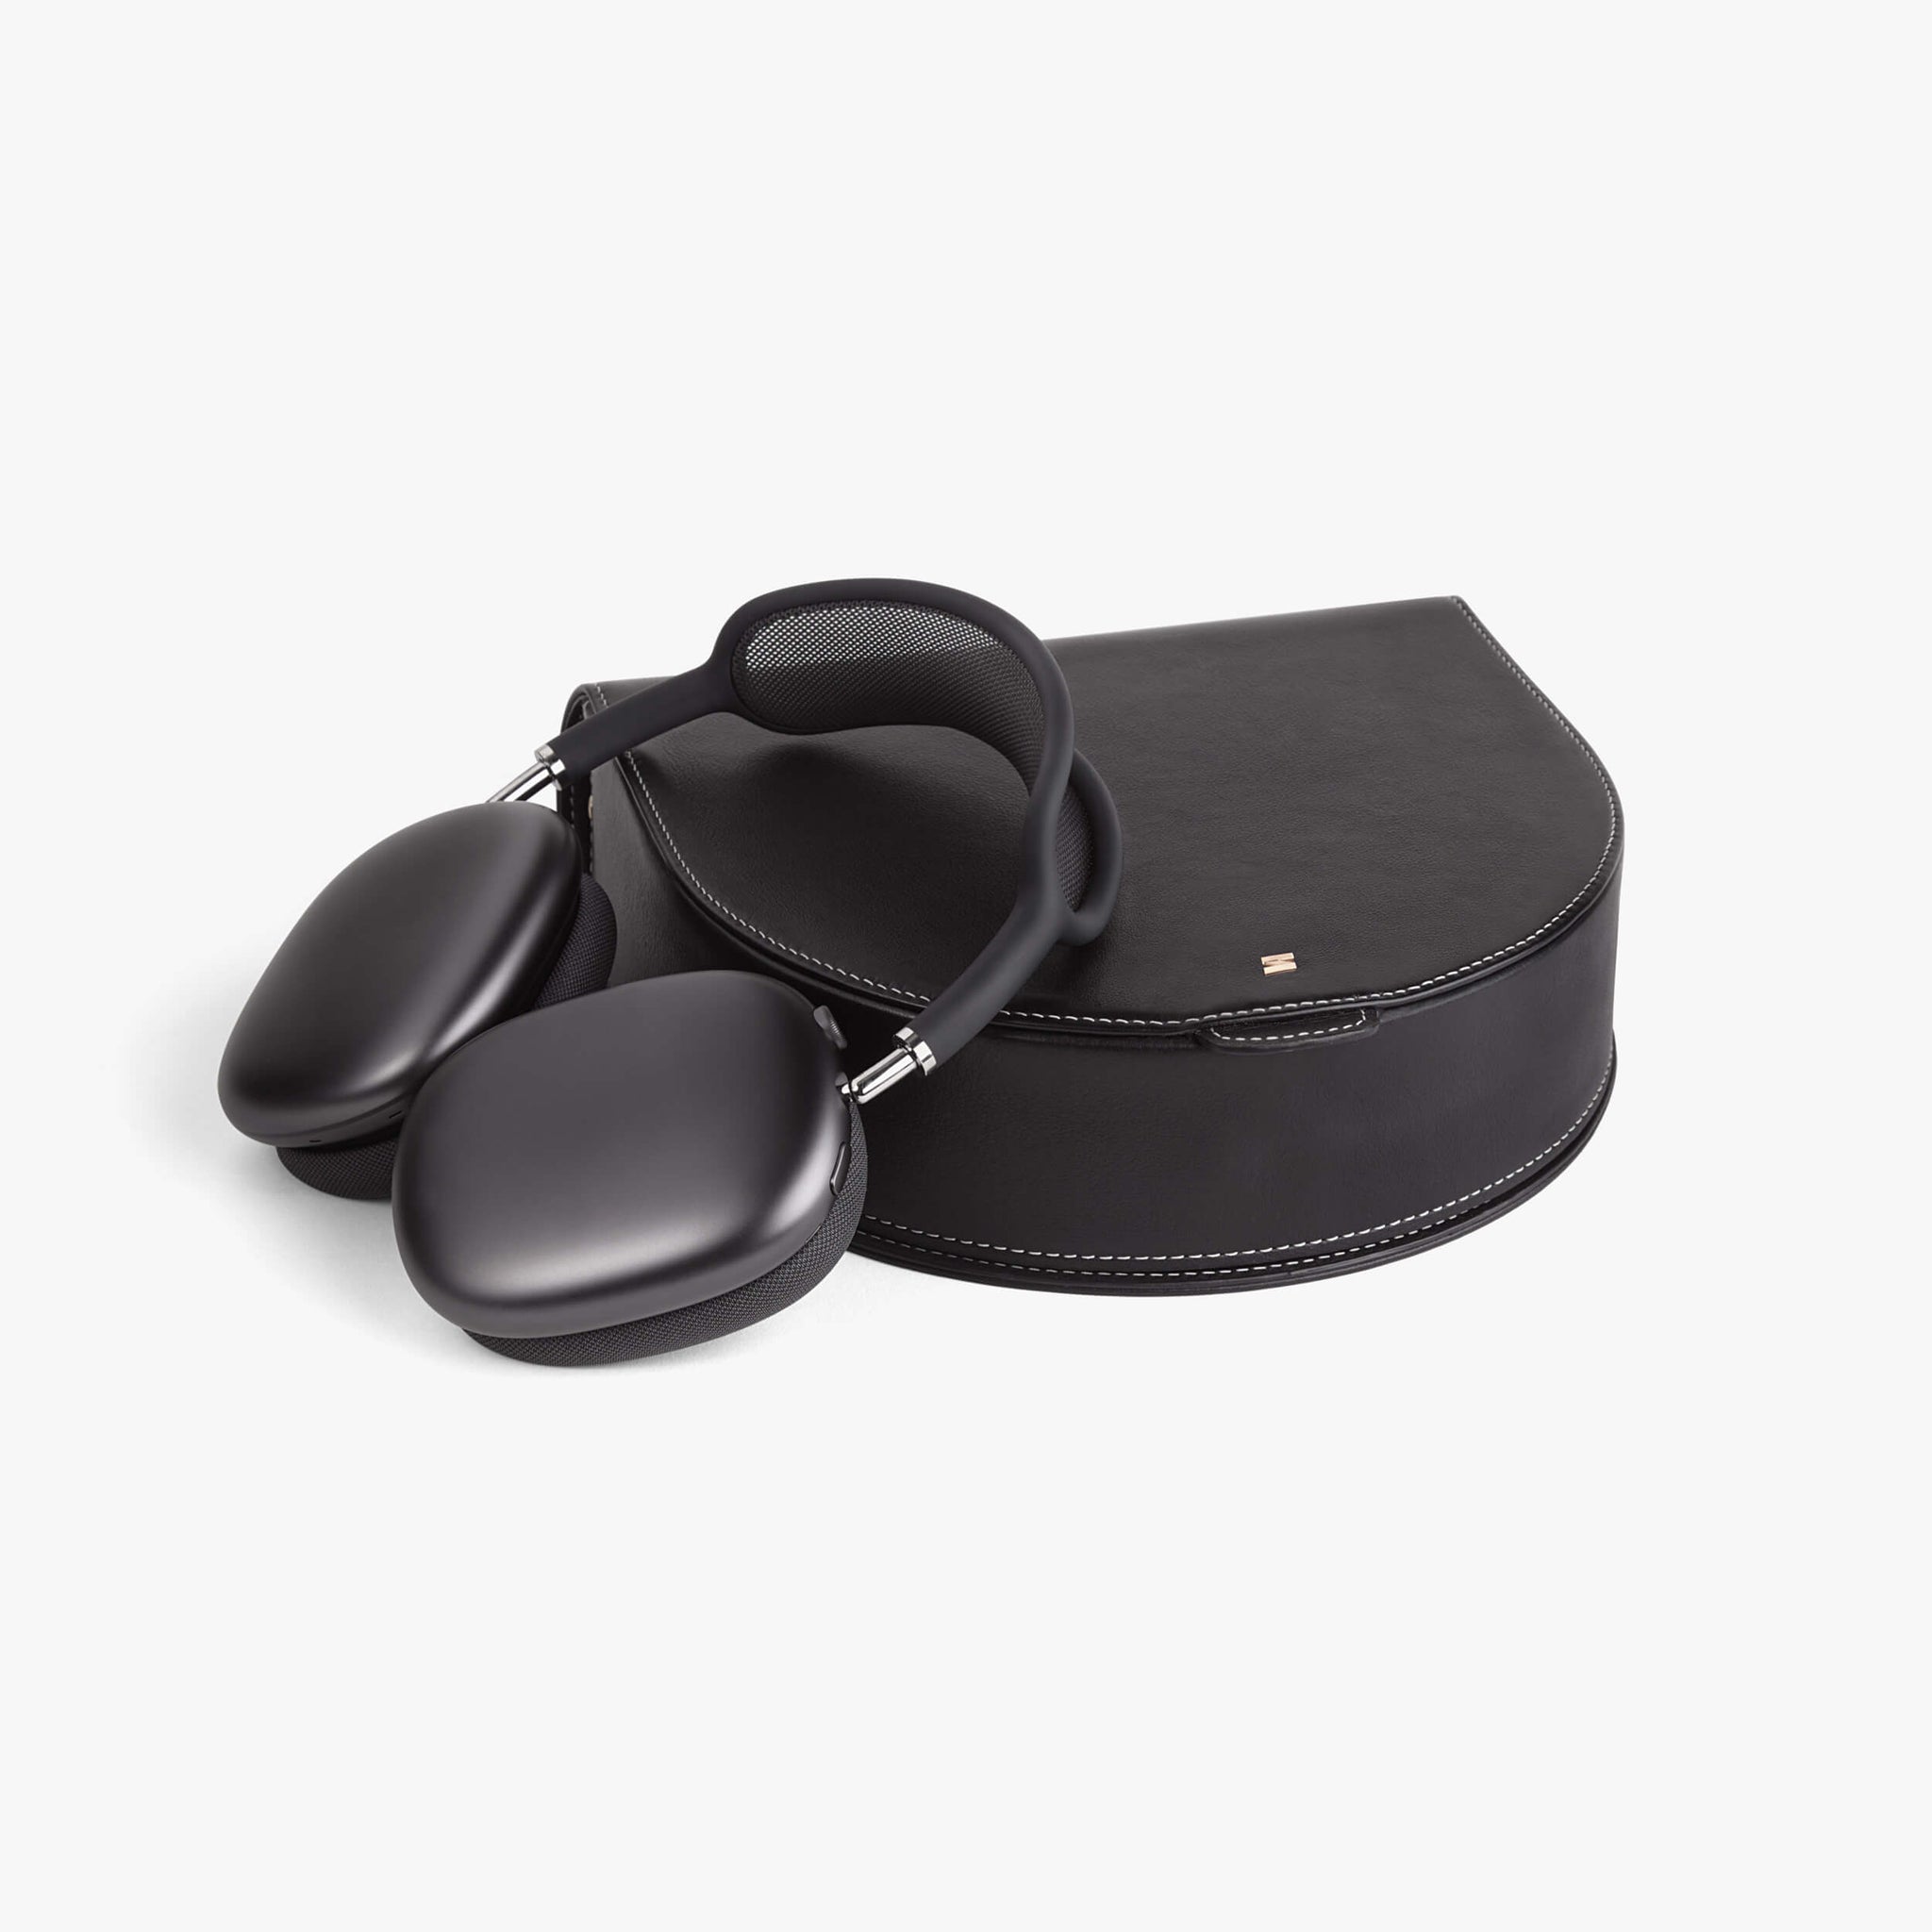 AirPods Max Leather Case Black